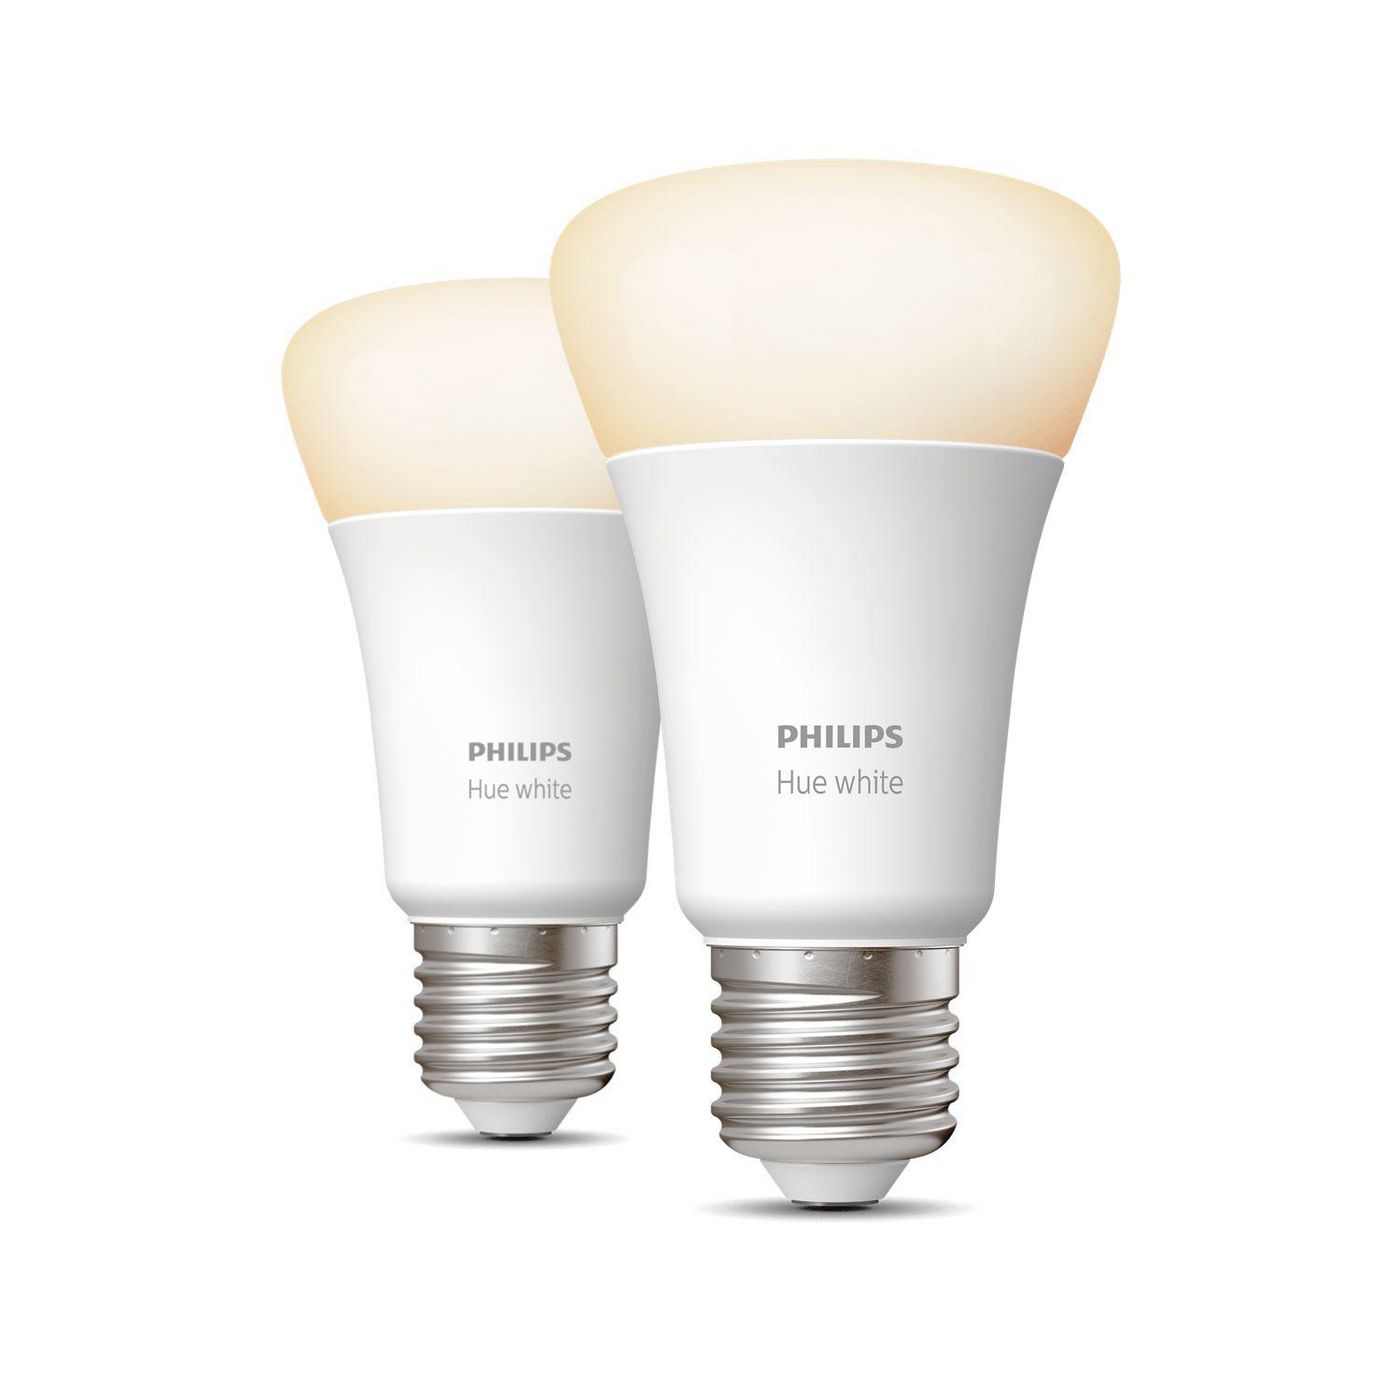 Philips-by-Signify 929001821605 Hue White E27 Bulb - BT - 